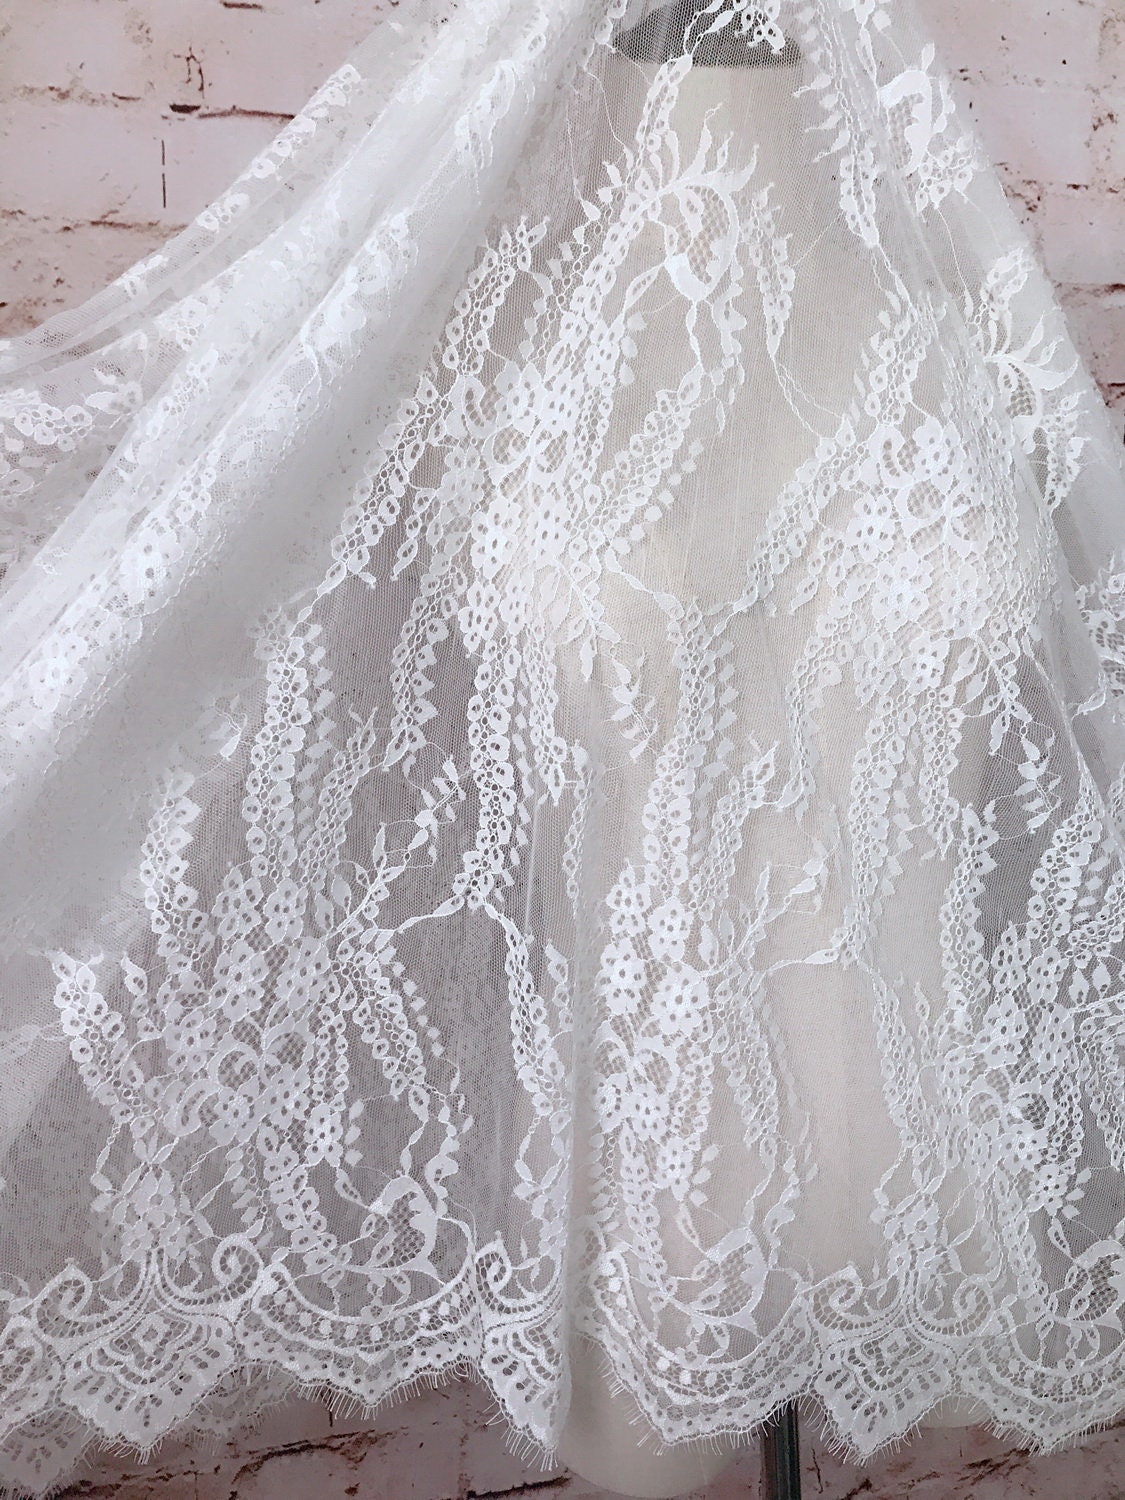 Off-white Chantilly Lace French Lace Fabric for Bridal dress | Etsy